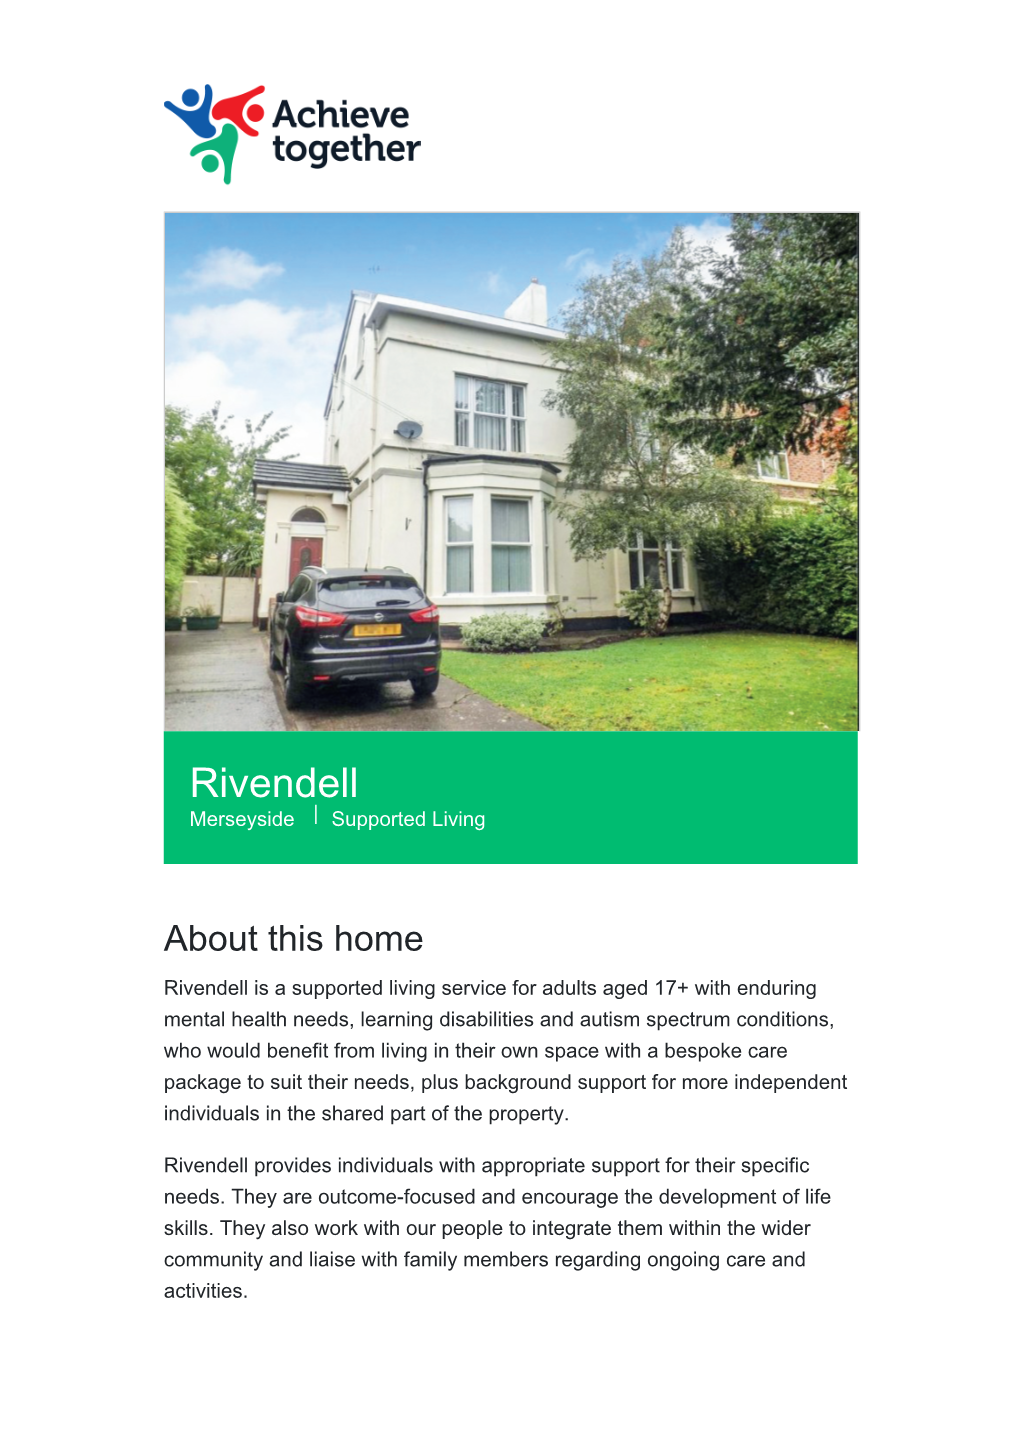 Rivendell Merseyside | Supported Living